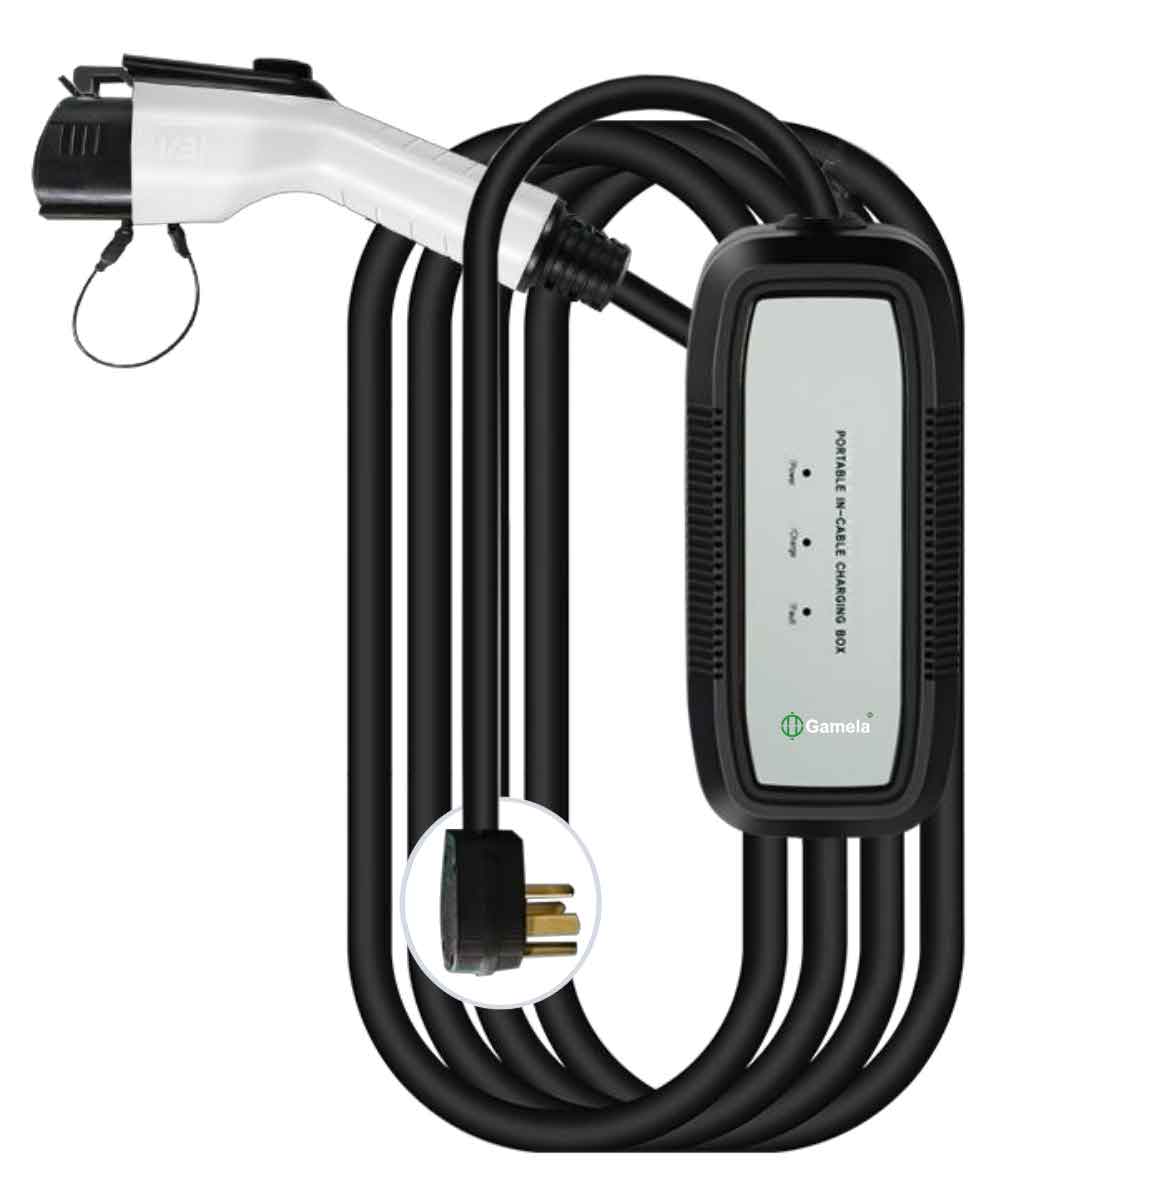 1451EAMG - Type1-J1772-48A-AC-Indicator-Light-Portable-Ev-Charger-with-power-plug-14-50P-output-current-48A